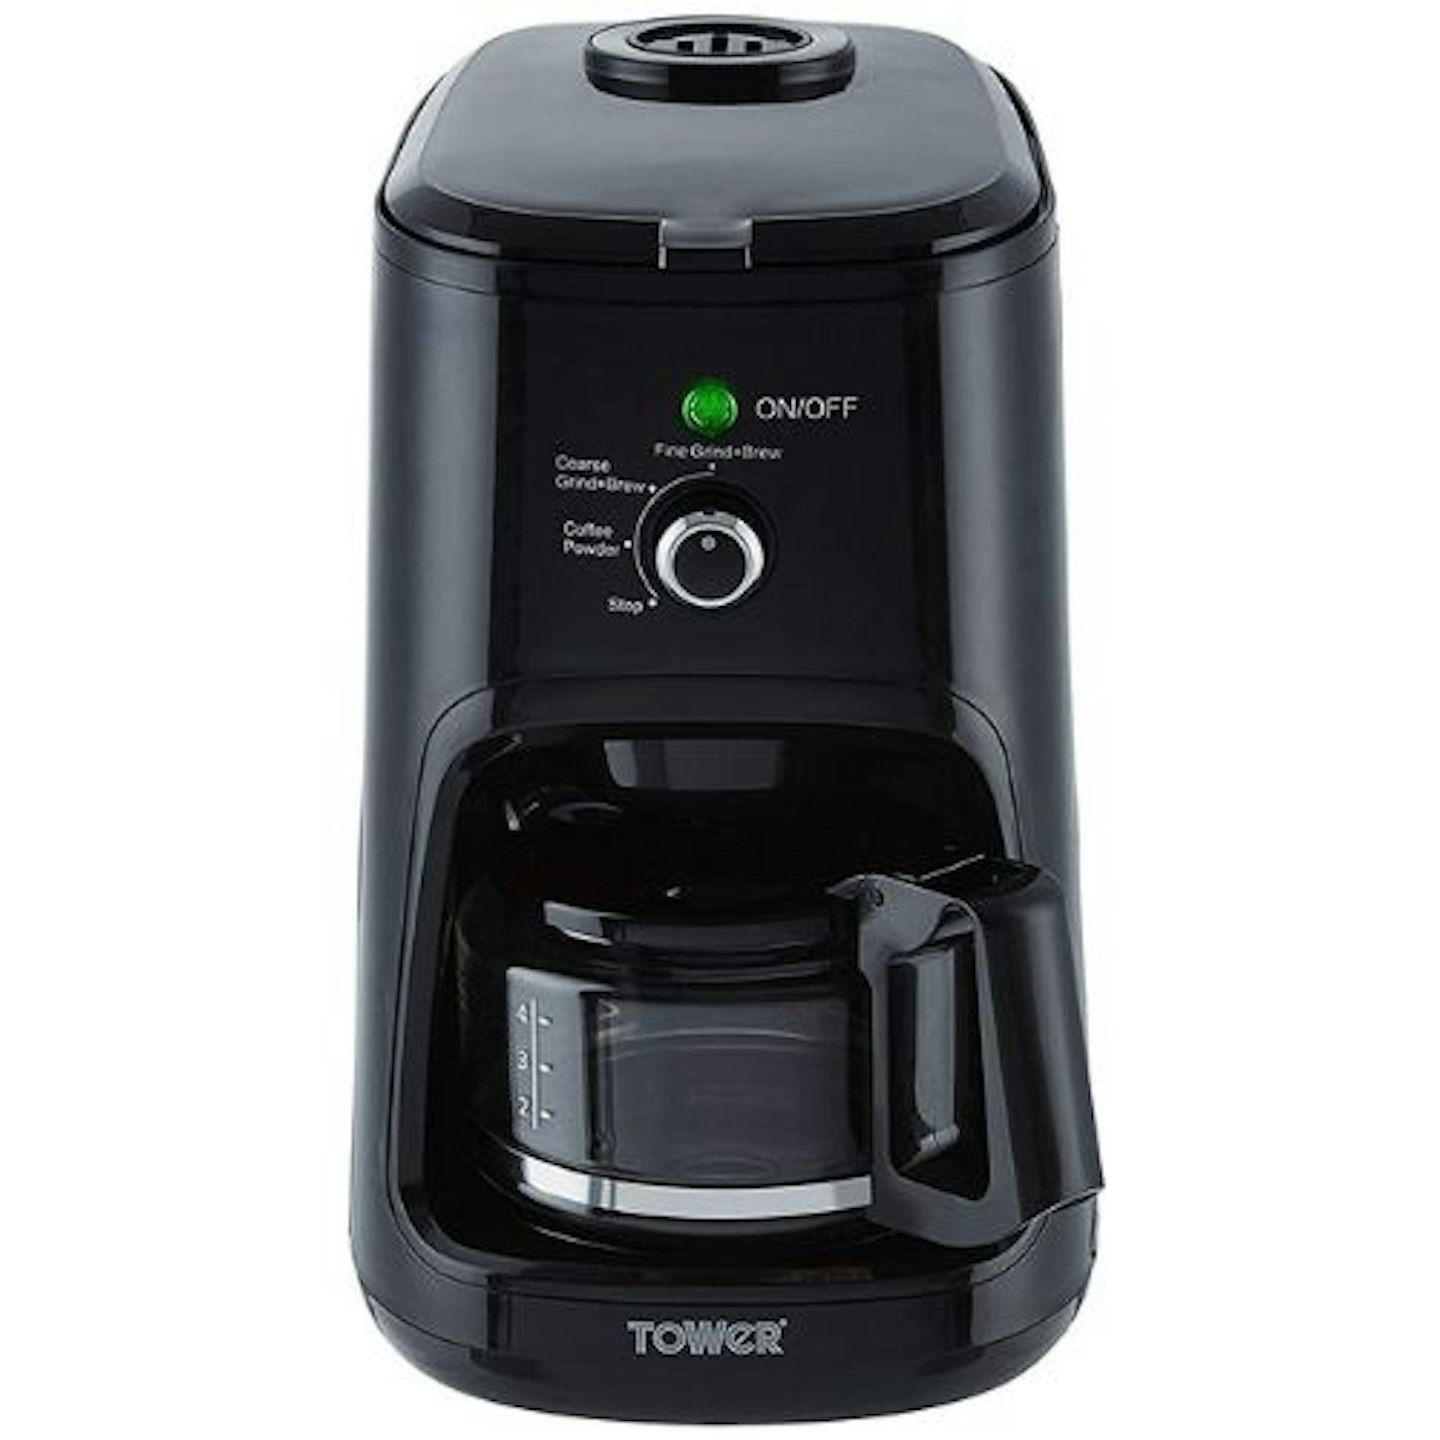 Tower T13005 Bean to Cup Coffee Maker